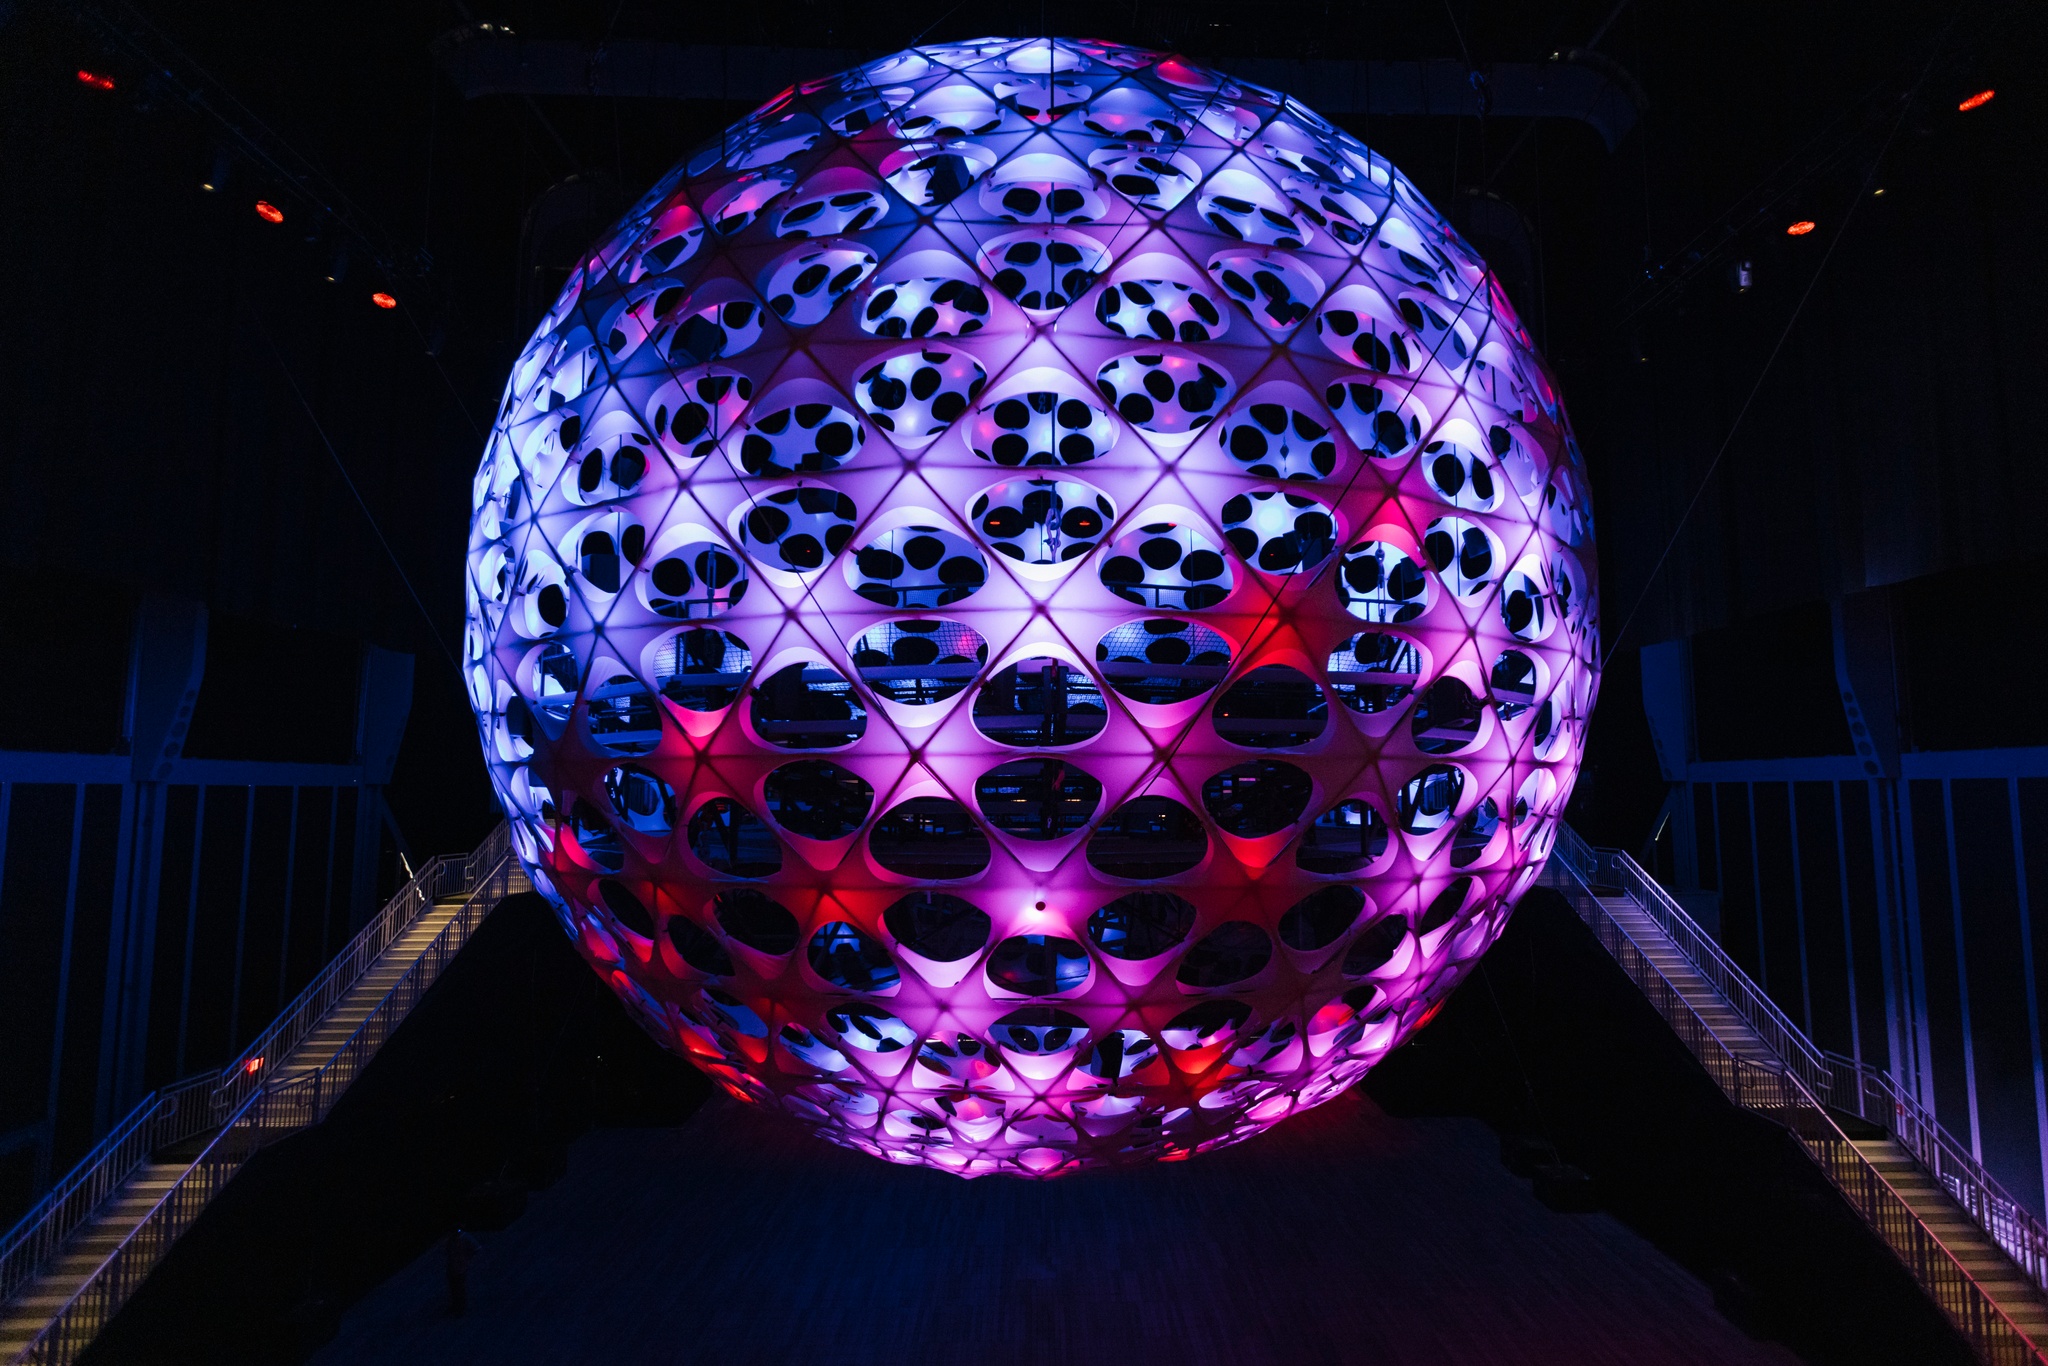 A vast spherical concert hall hangs from a 115-foot ceiling in a dark performance space. The sphere is dotted with nodes that light up in purple and blue light. Flanking the sphere are two sets of metal staircases that rise to the equator of the sphere.